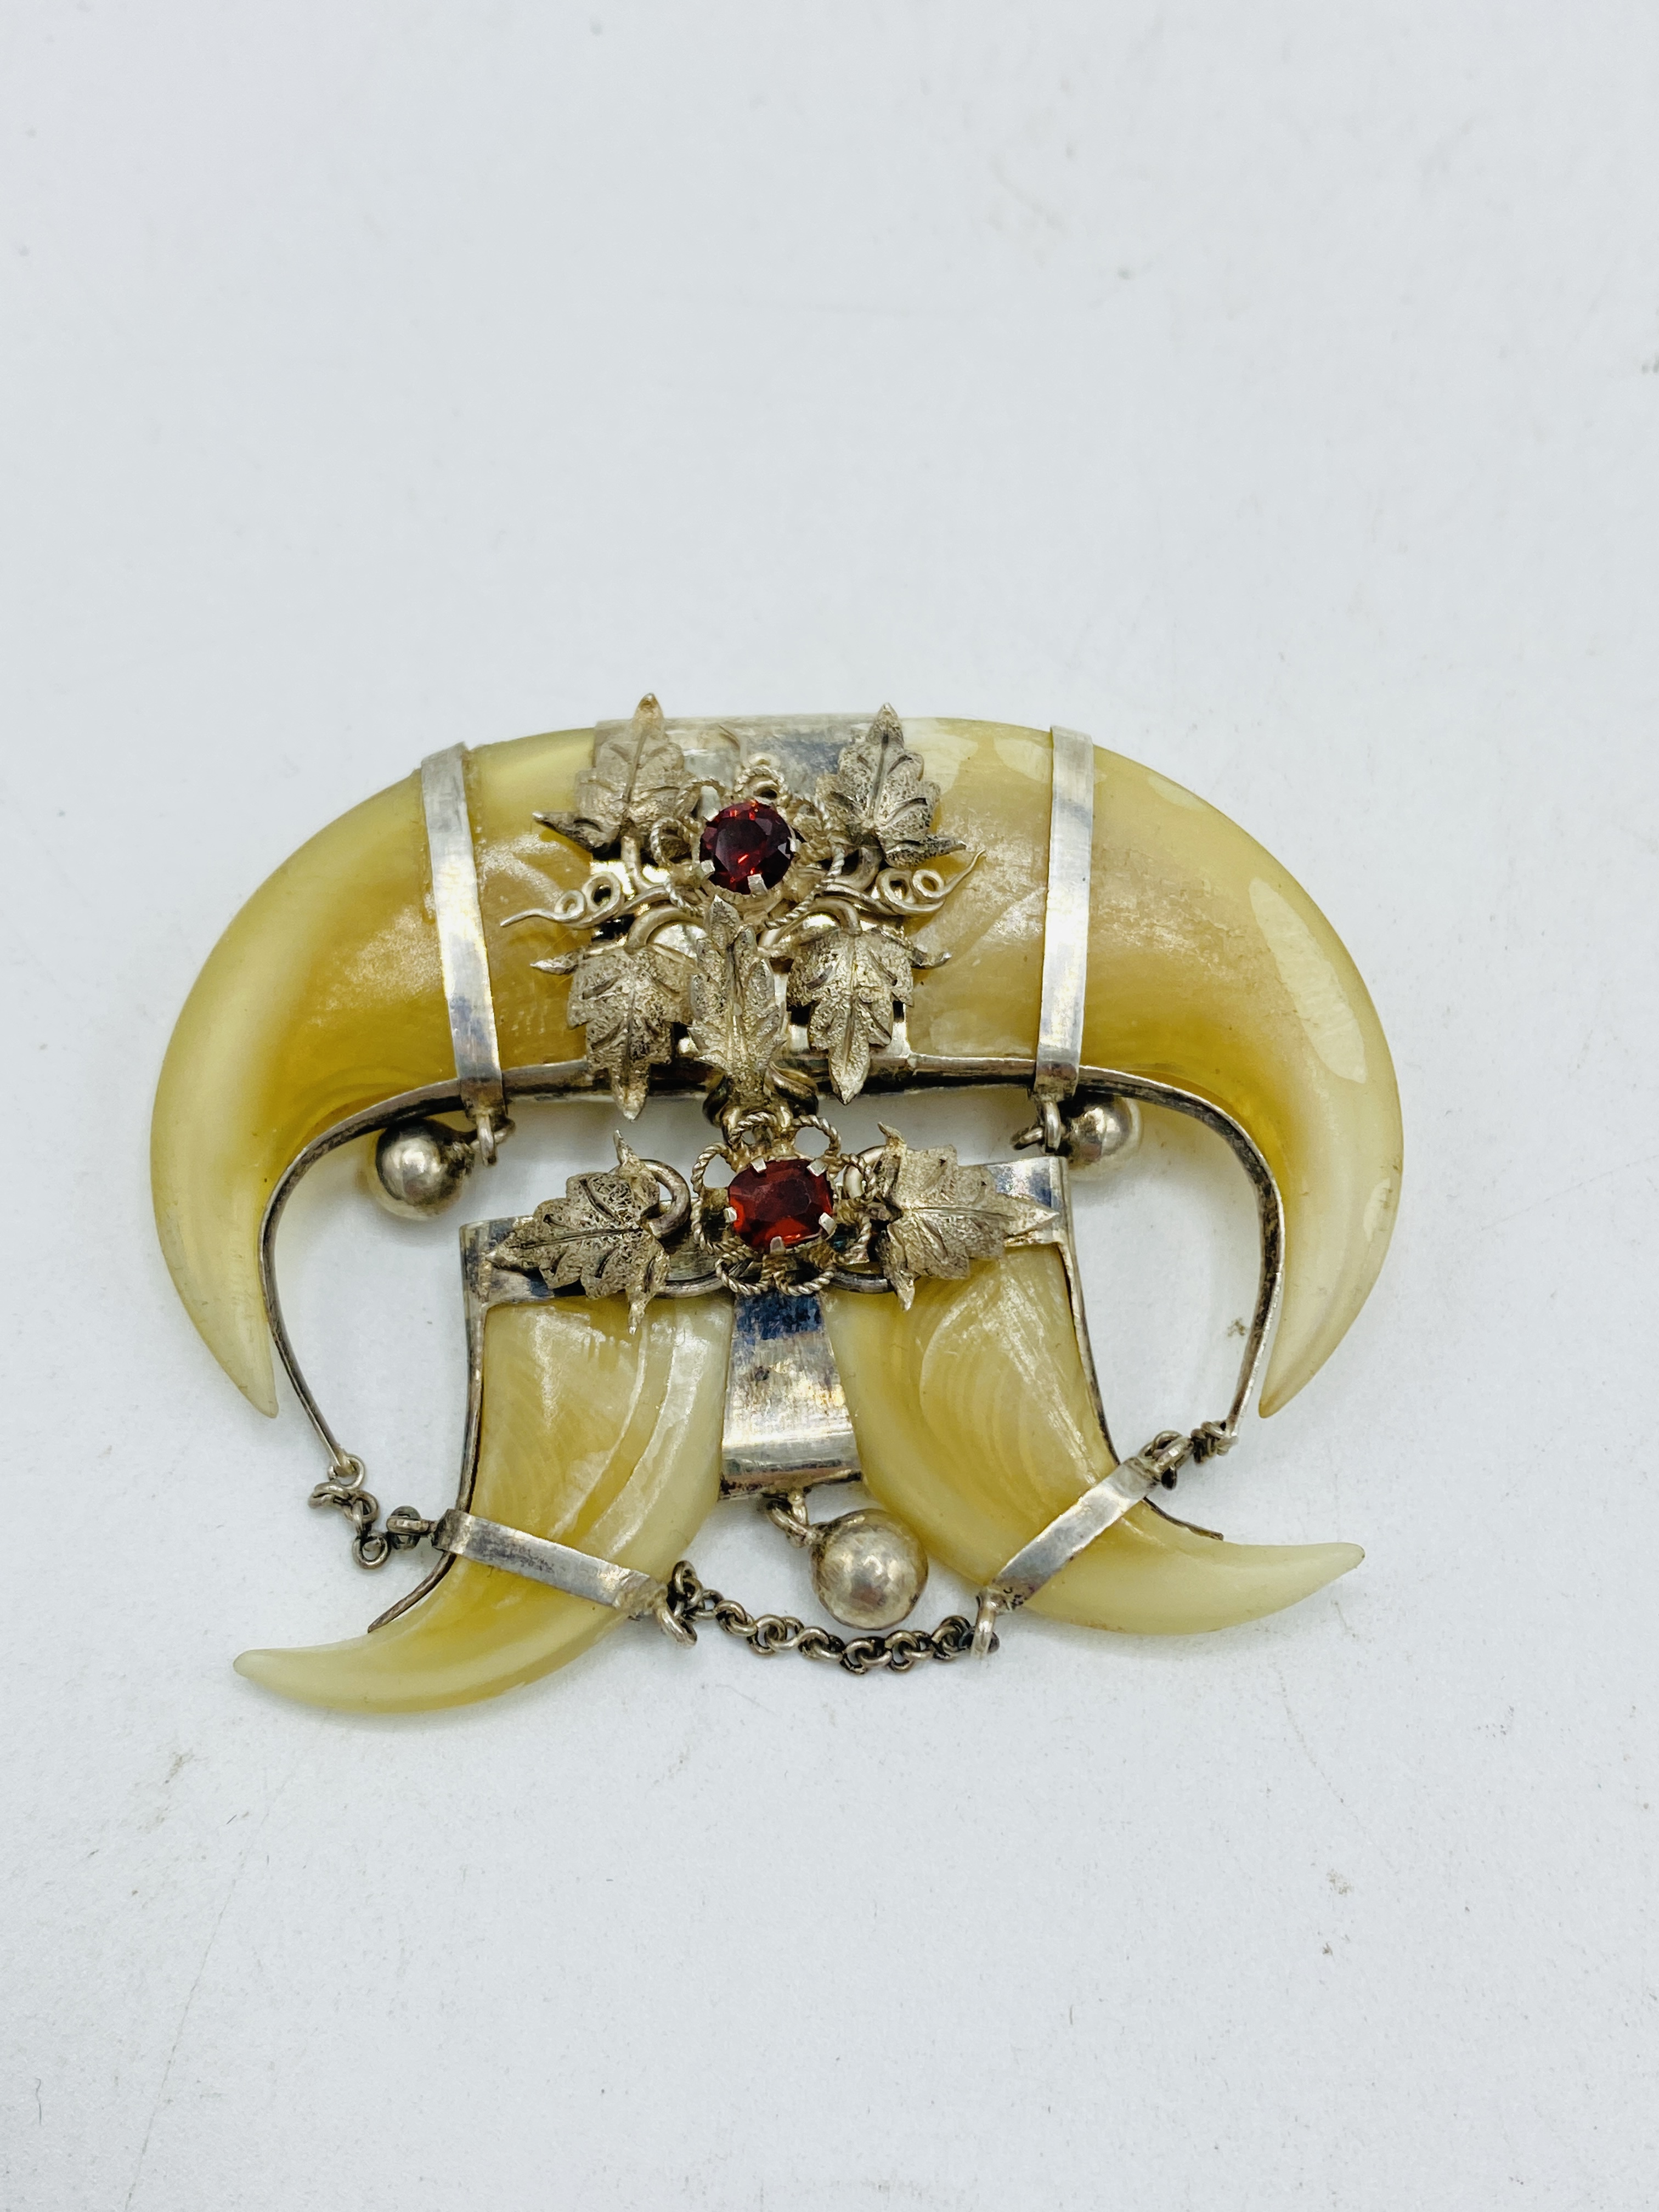 Tigers claw brooch and earrings set - Image 2 of 5